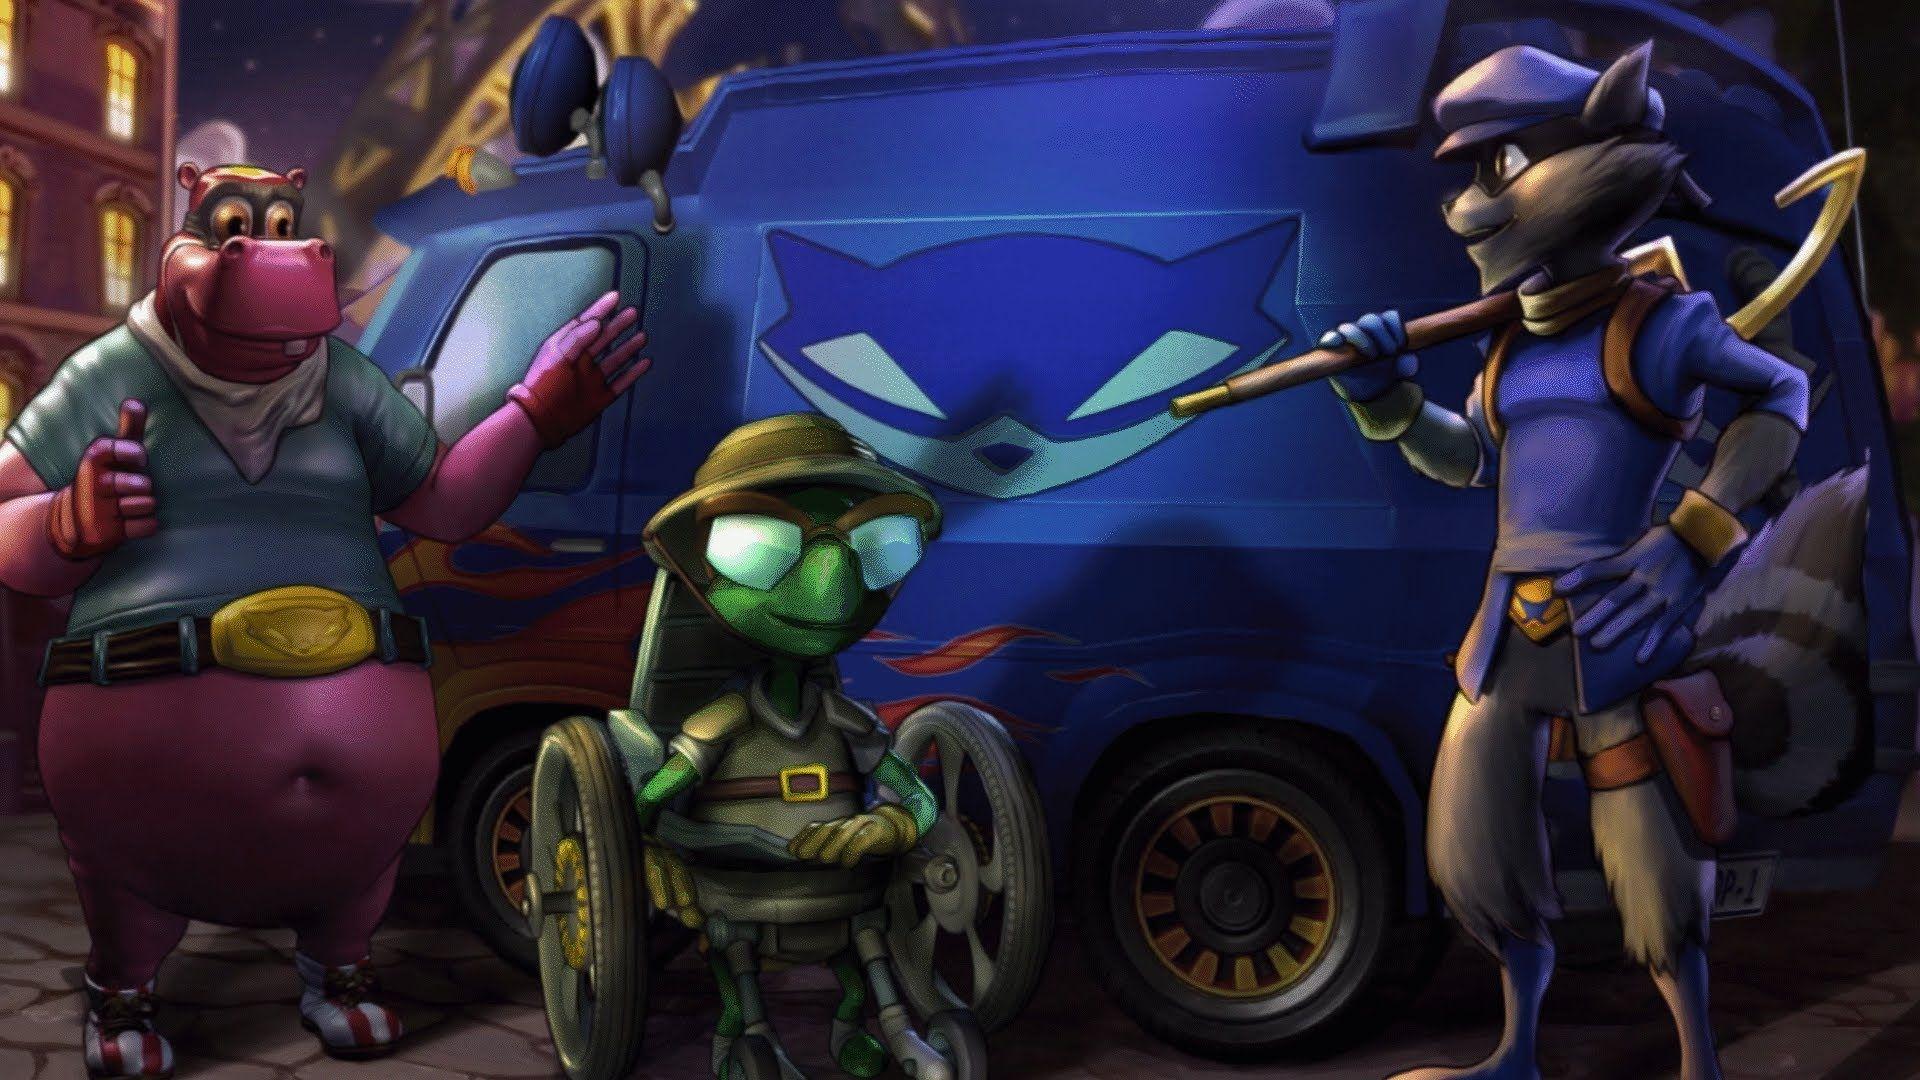 Sly Cooper Boss Fight (PlayStation All Stars)